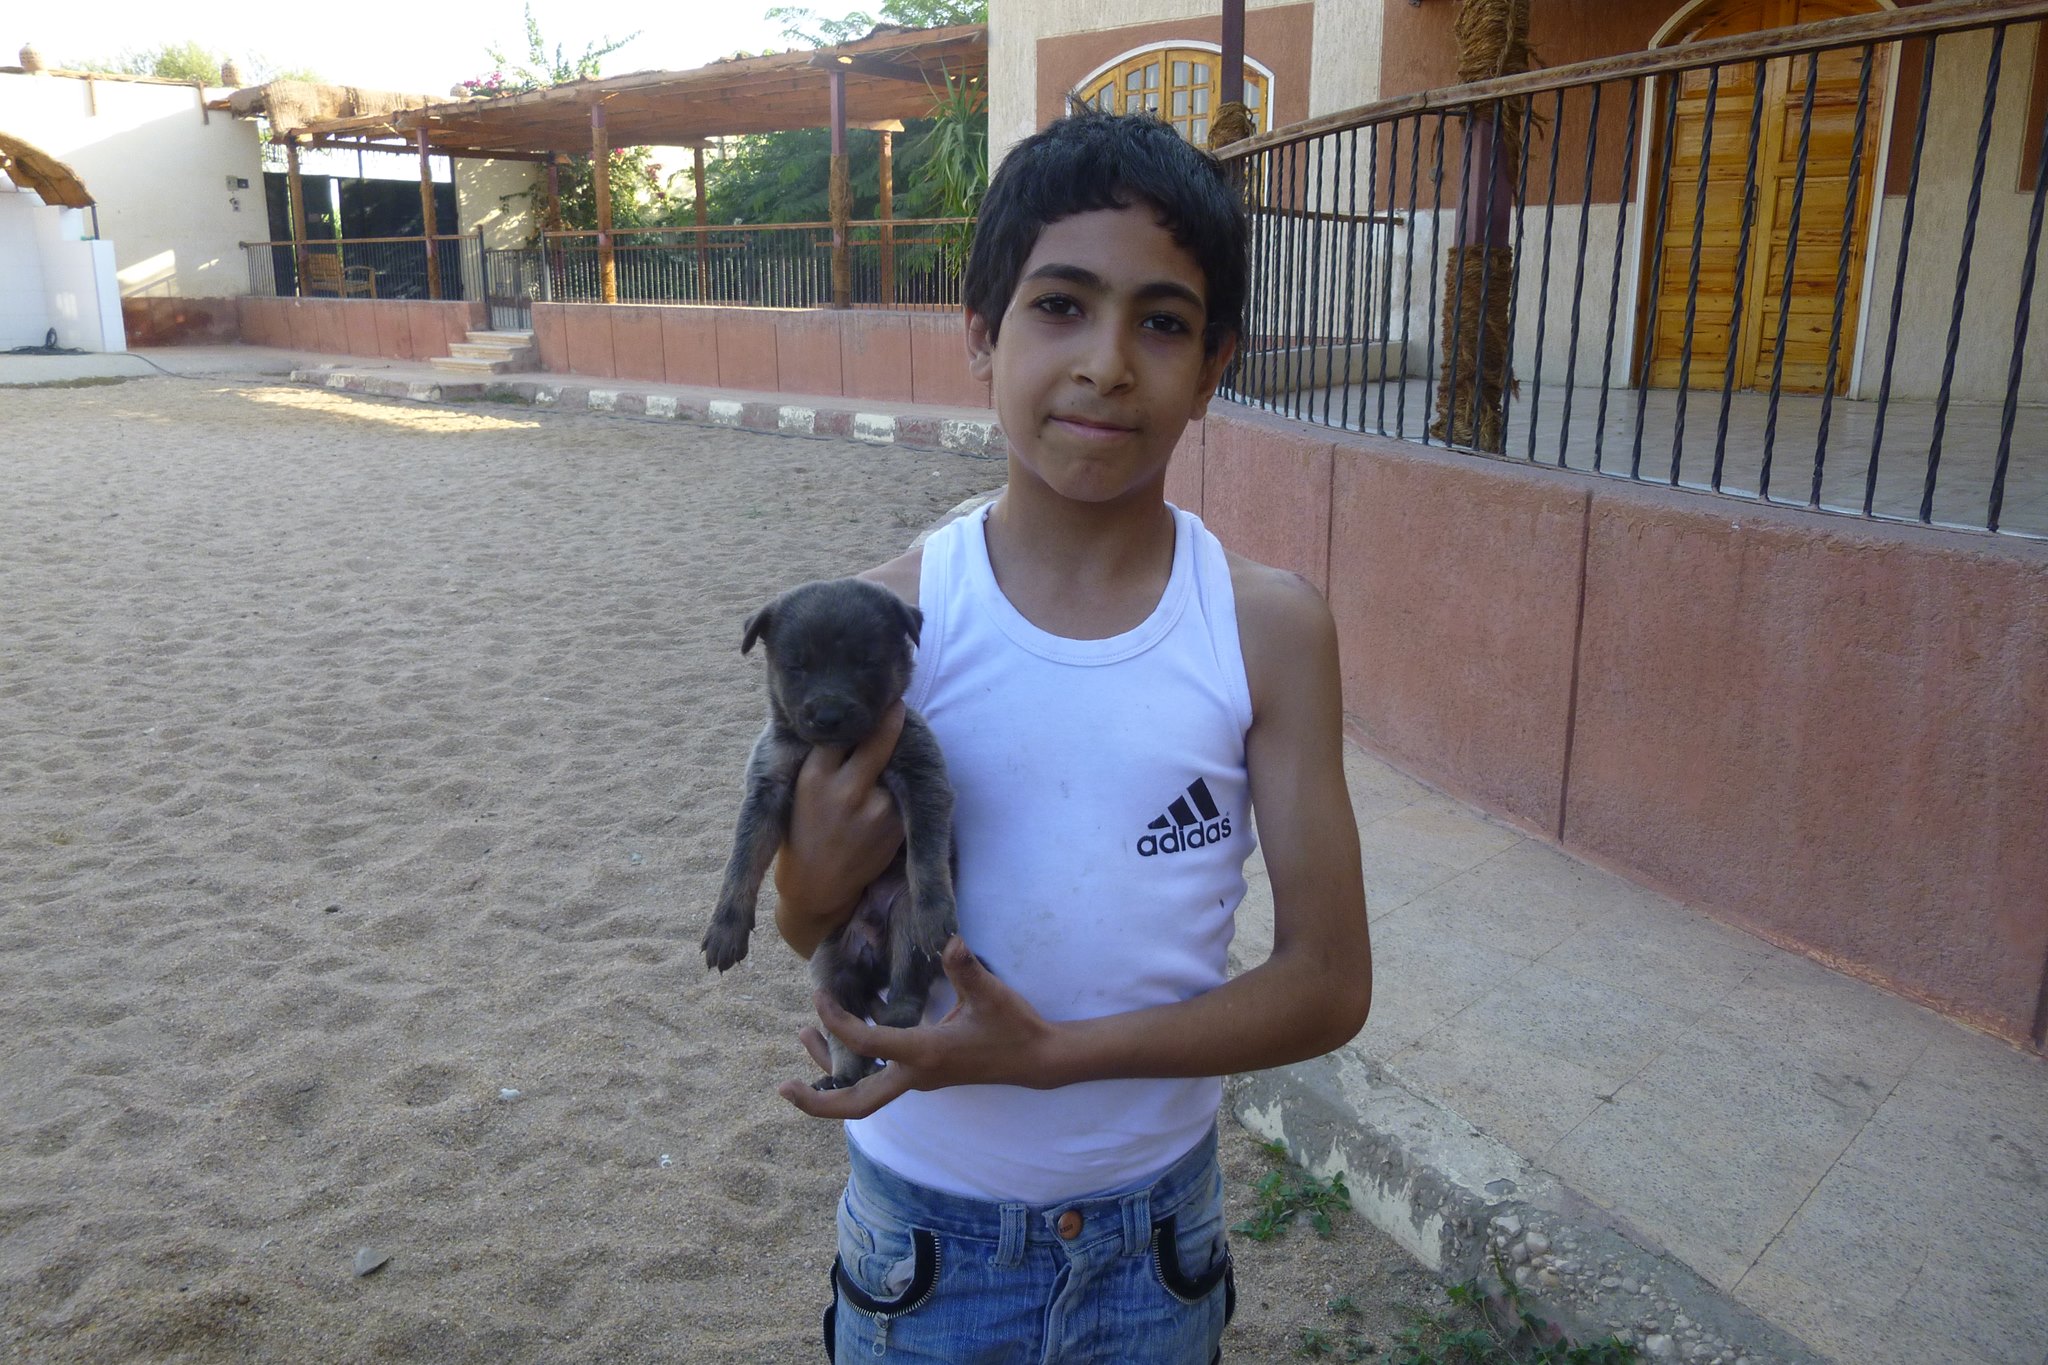 This is Mahmoud. Mahmoud was cycling with his cousins when he heard cries coming from disposed rubbish. He found this little puppy and brought him straight to ACE for a health check. Mahmoud named the puppy 'Rex' and now takes care of him with the advice of ACE.